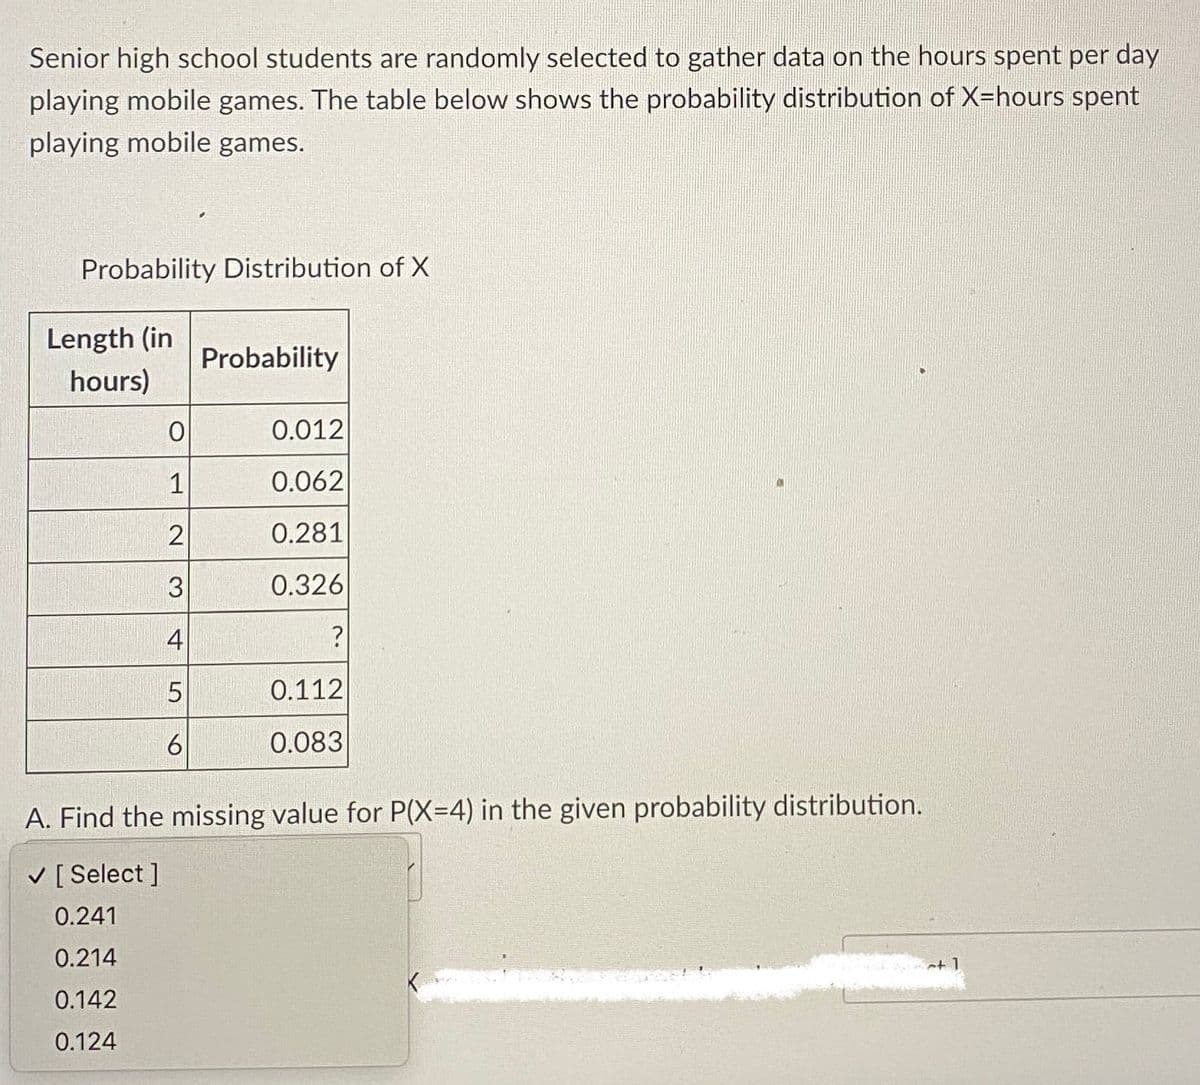 Senior high school students are randomly selected to gather data on the hours spent per day
playing mobile games. The table below shows the probability distribution of X=hours spent
playing mobile games.
Probability Distribution of X
Length (in
hours)
0
1
2
3
4
5
6
Probability
0.012
0.062
0.281
0.326
?
0.112
PALERMORY
0.083
A. Find the missing value for P(X=4) in the given probability distribution.
✓ [Select ]
0.241
0.214
0.142
0.124